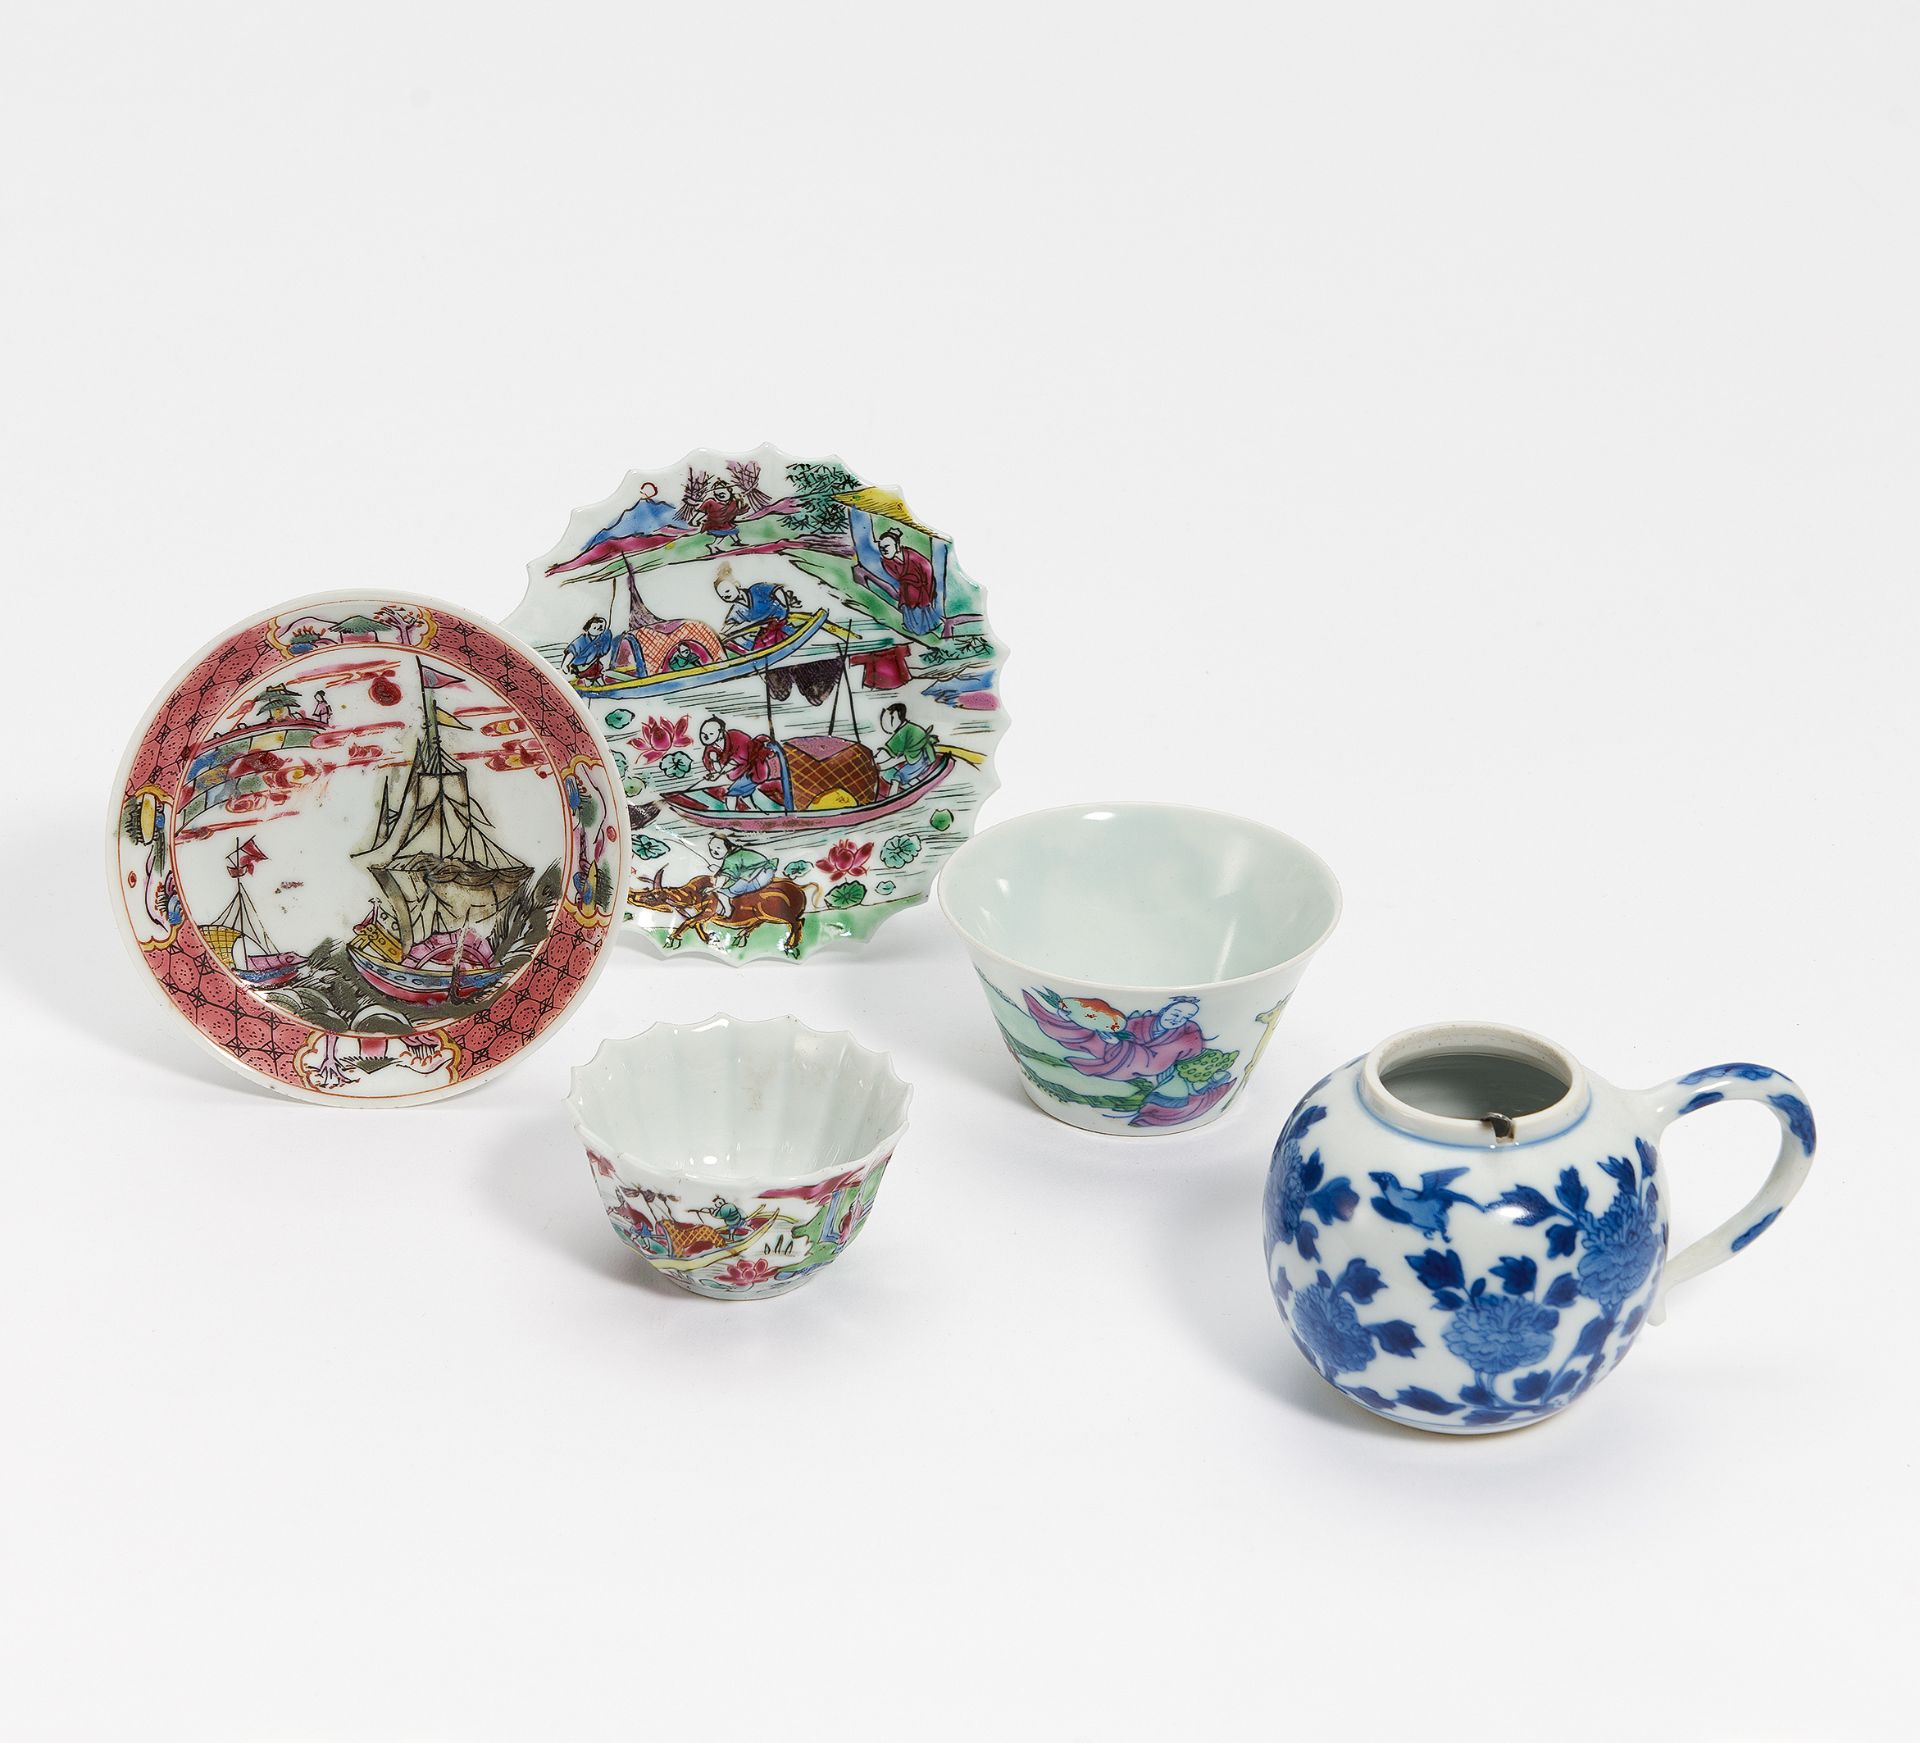 FIVE SMAL PORCELAIN PIECES: TWO CUPS WITH SAUCERS AND A WATER POT. China. 18th-19th c. Porcelain